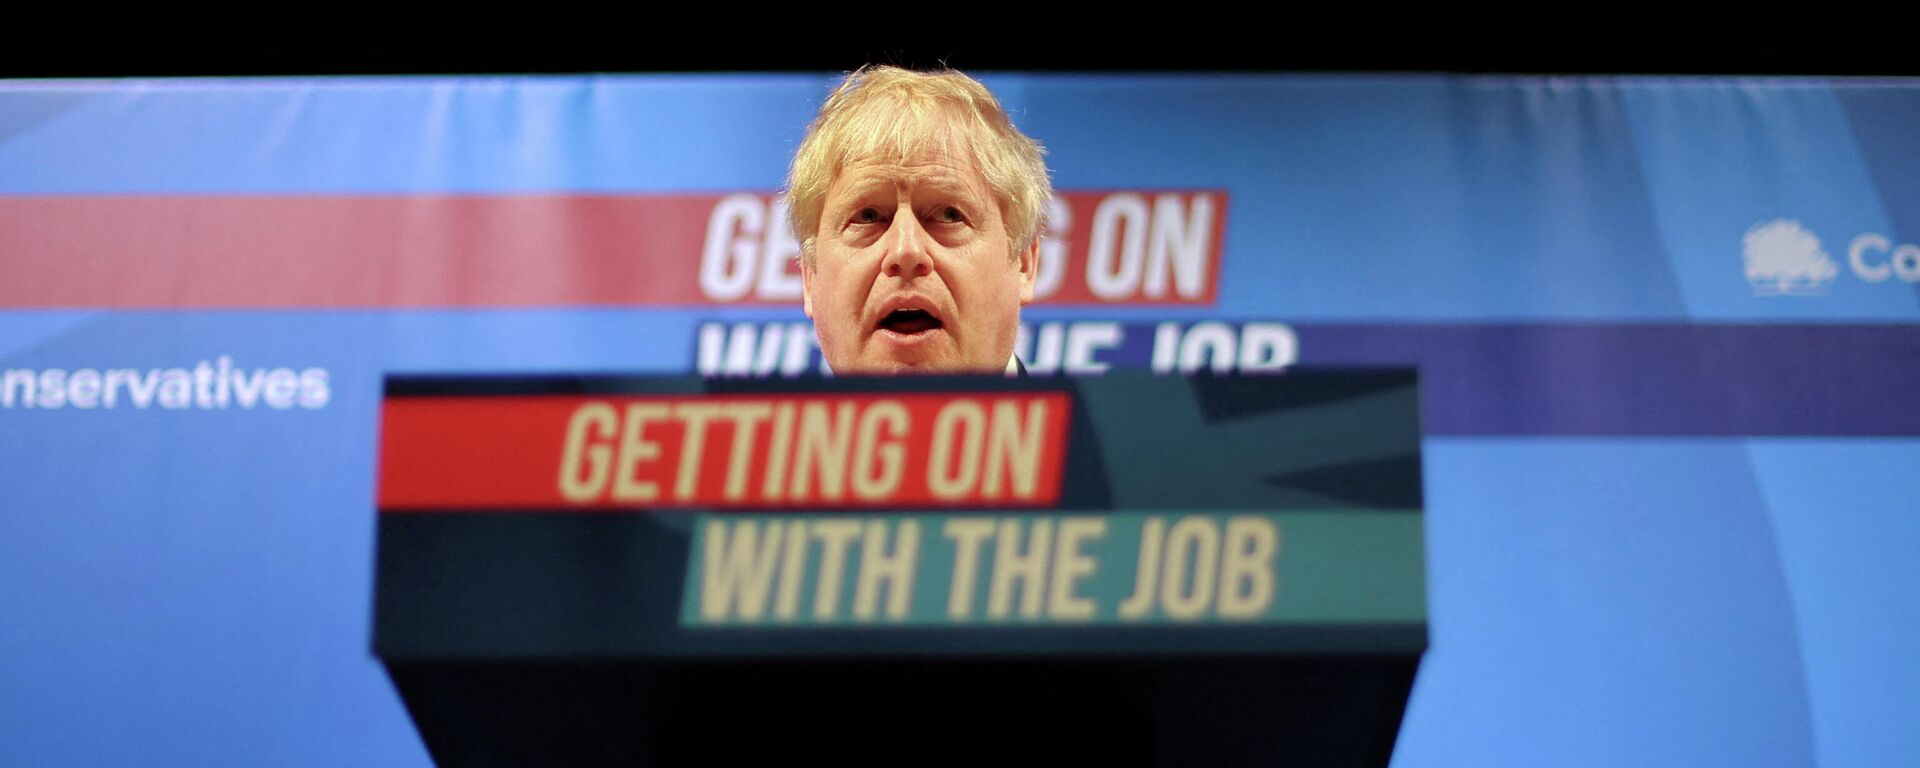 British Prime Minister Boris Johnson speaks at the Conservative Party Spring Conference in Blackpool, Britain March 19, 2022 - Sputnik International, 1920, 20.03.2022